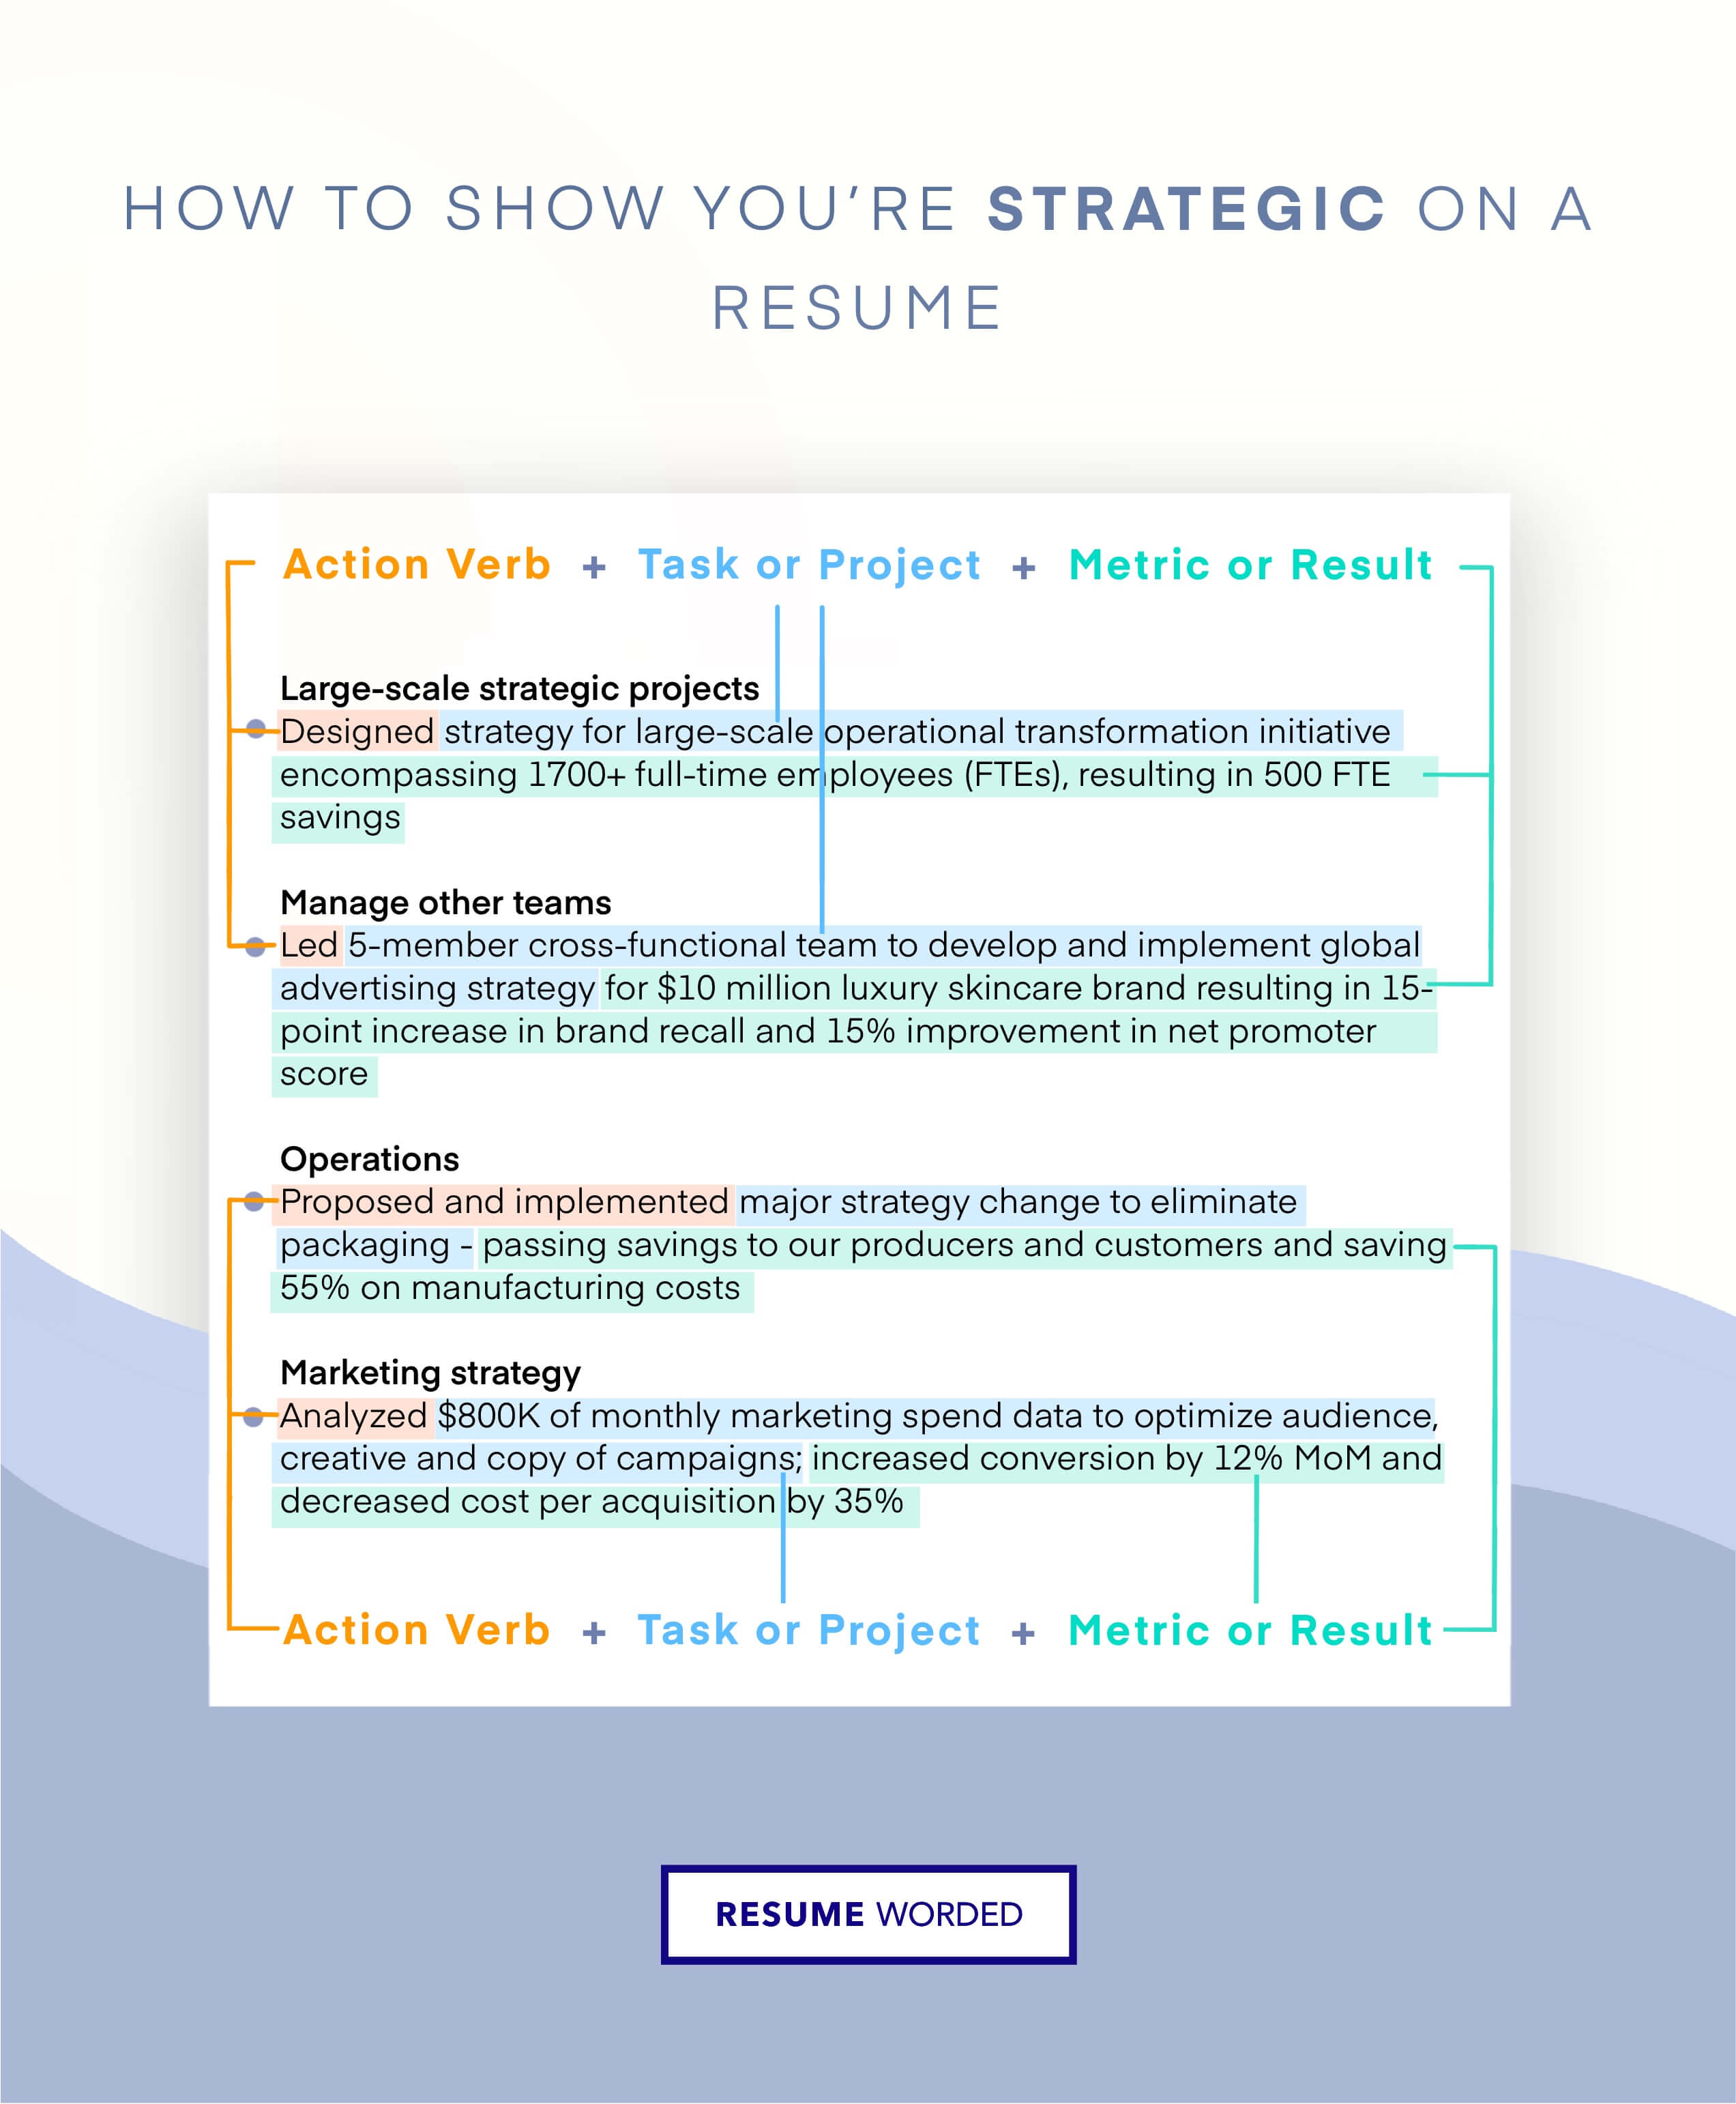 Show understanding and execution of effective brand strategy - Brand Marketing Manager CV